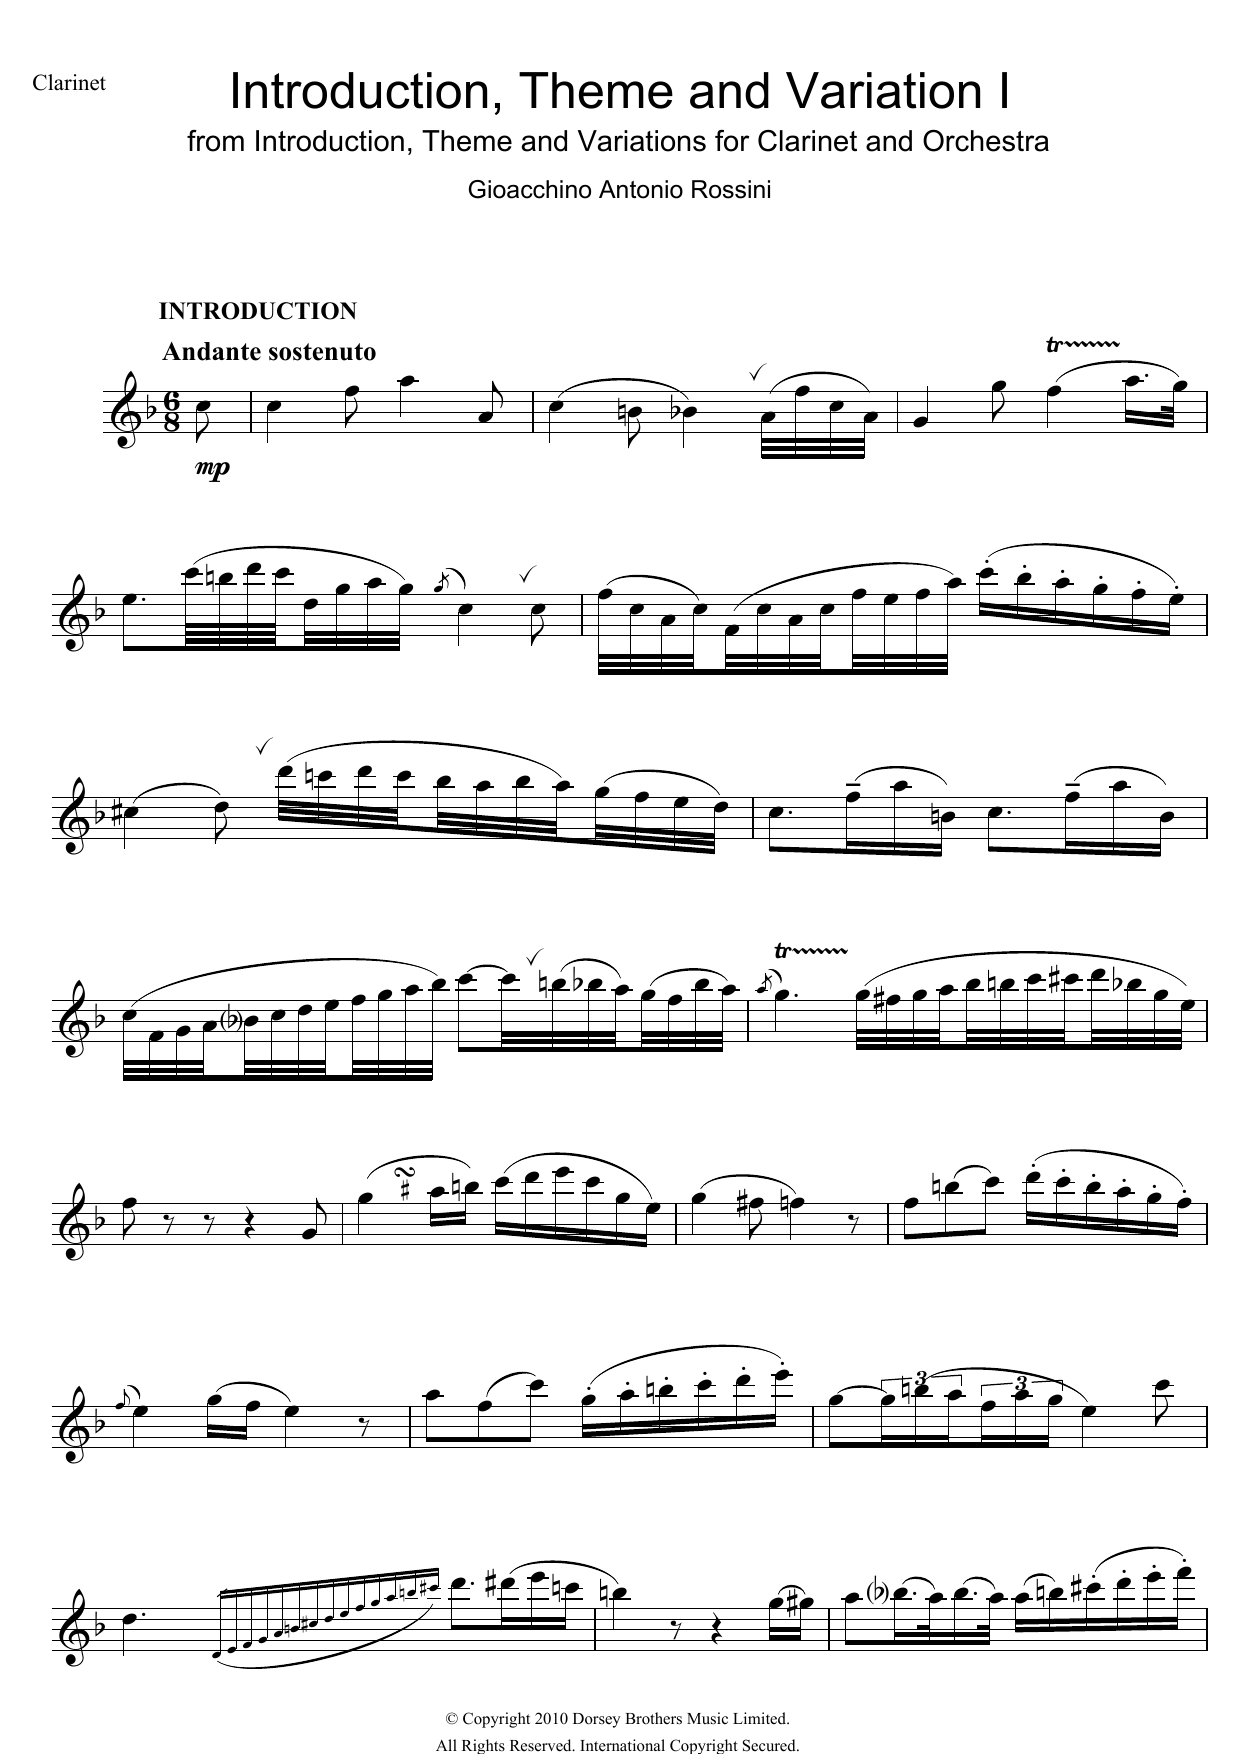 Introduction, Theme And Variations For Clarinet and Orchestra sheet music